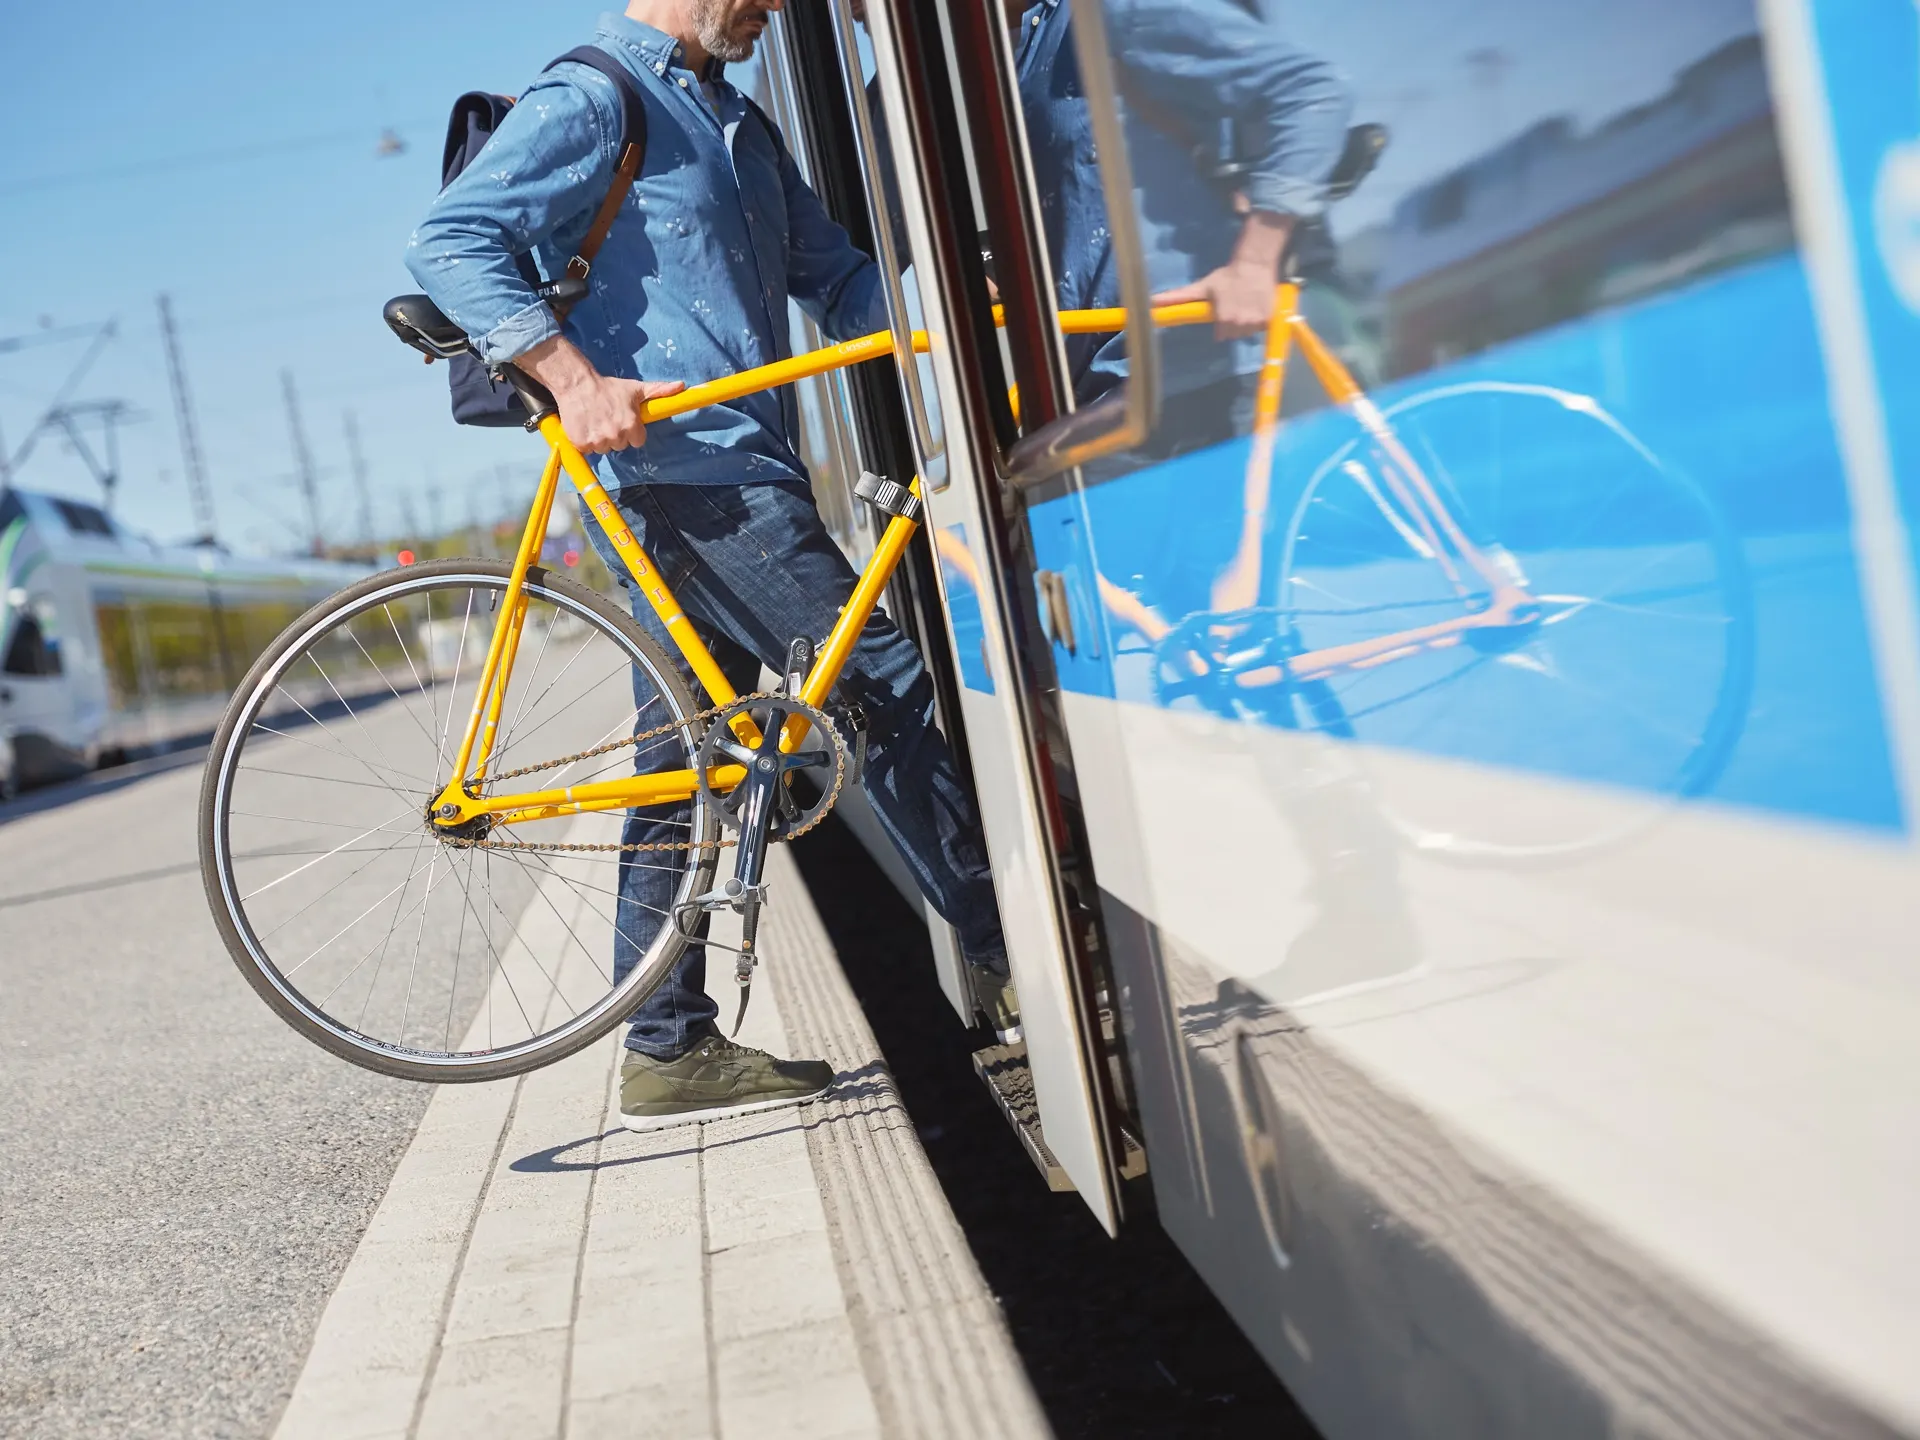 Bikes can be transported for free on commuter trains